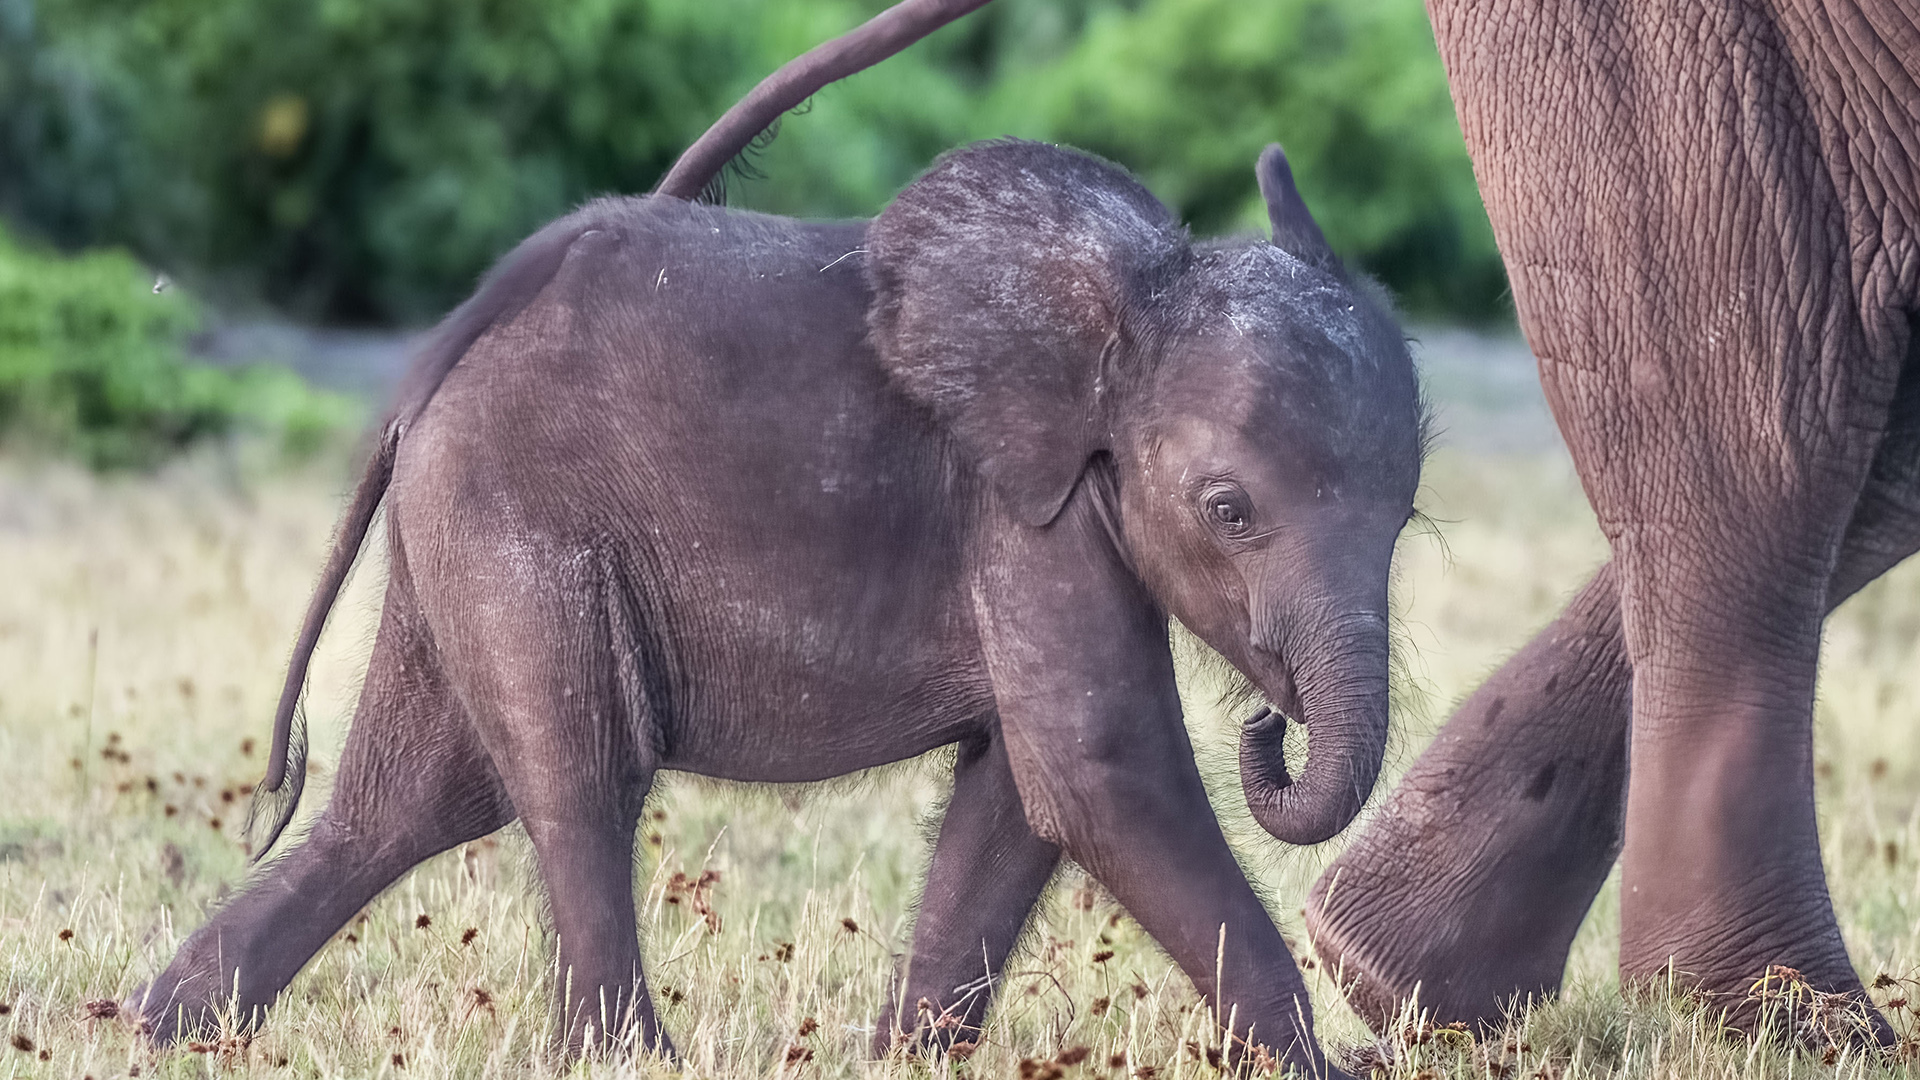 A baby forest elephant walks behind its mother's legs